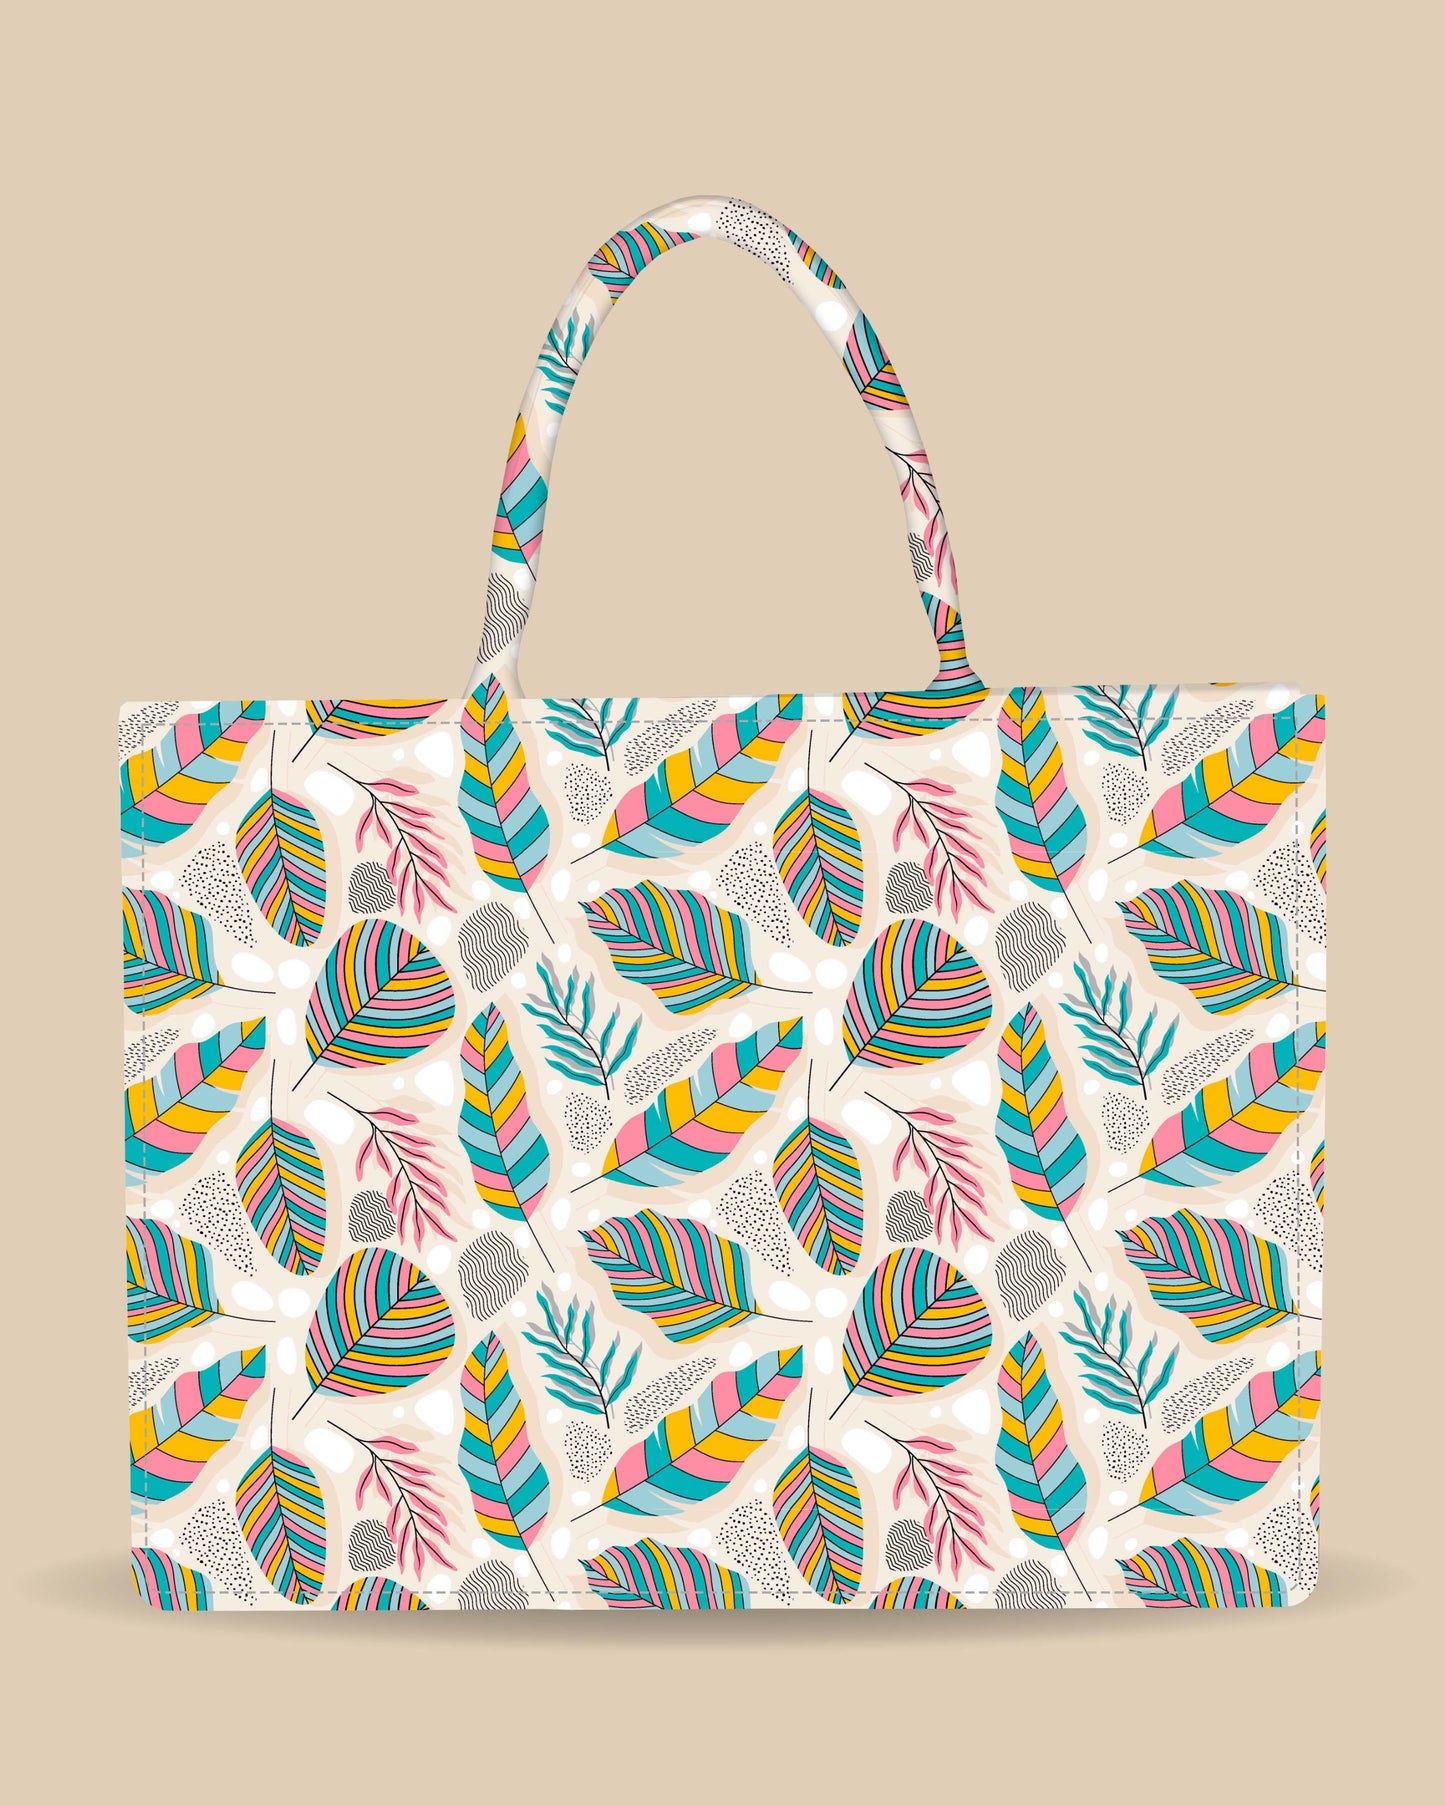 Customized Tote Bag Designed With Sand ,Stones And Colorful Leaves